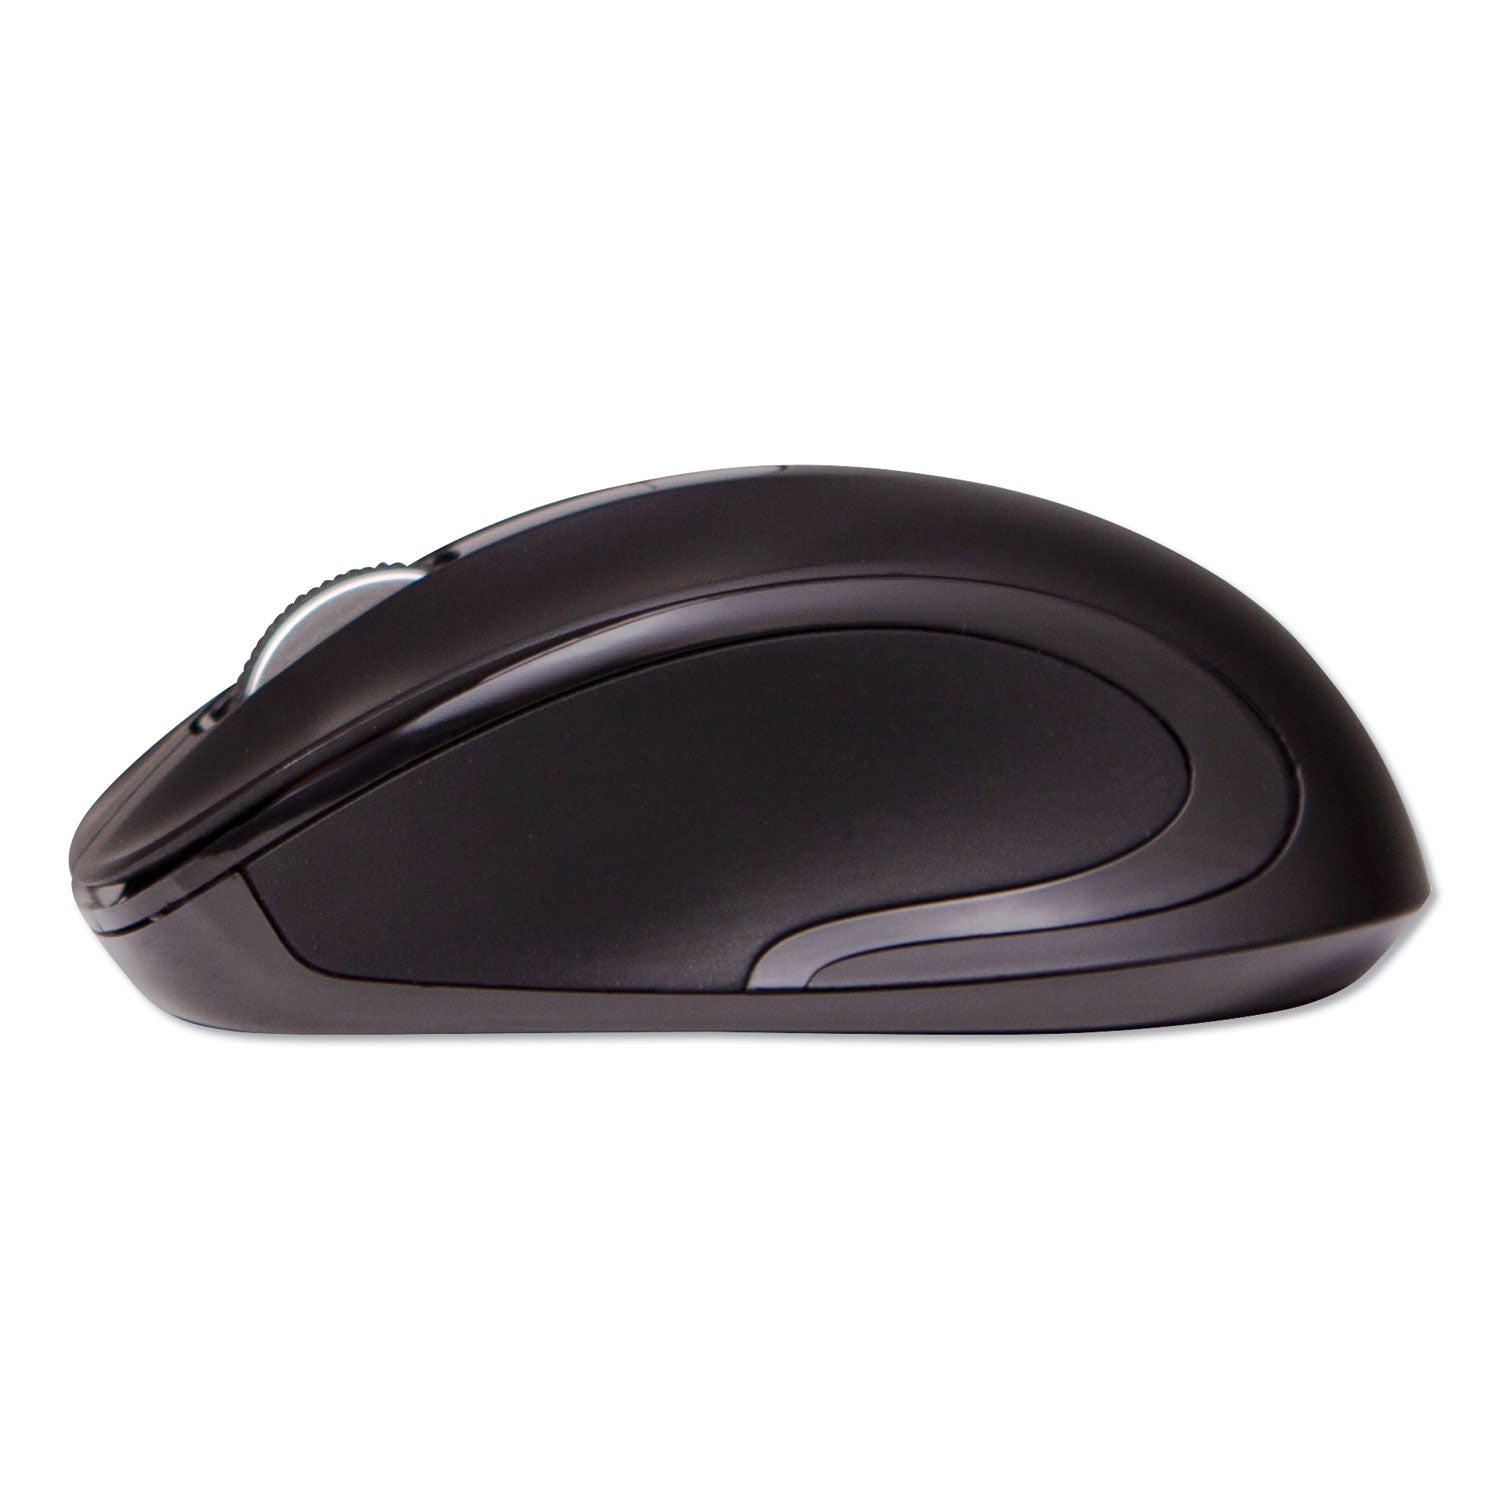 mid-size-wireless-optical-mouse-with-micro-usb-24-ghz-frequency-26-ft-wireless-range-right-hand-use-black_ivr61500 - 3